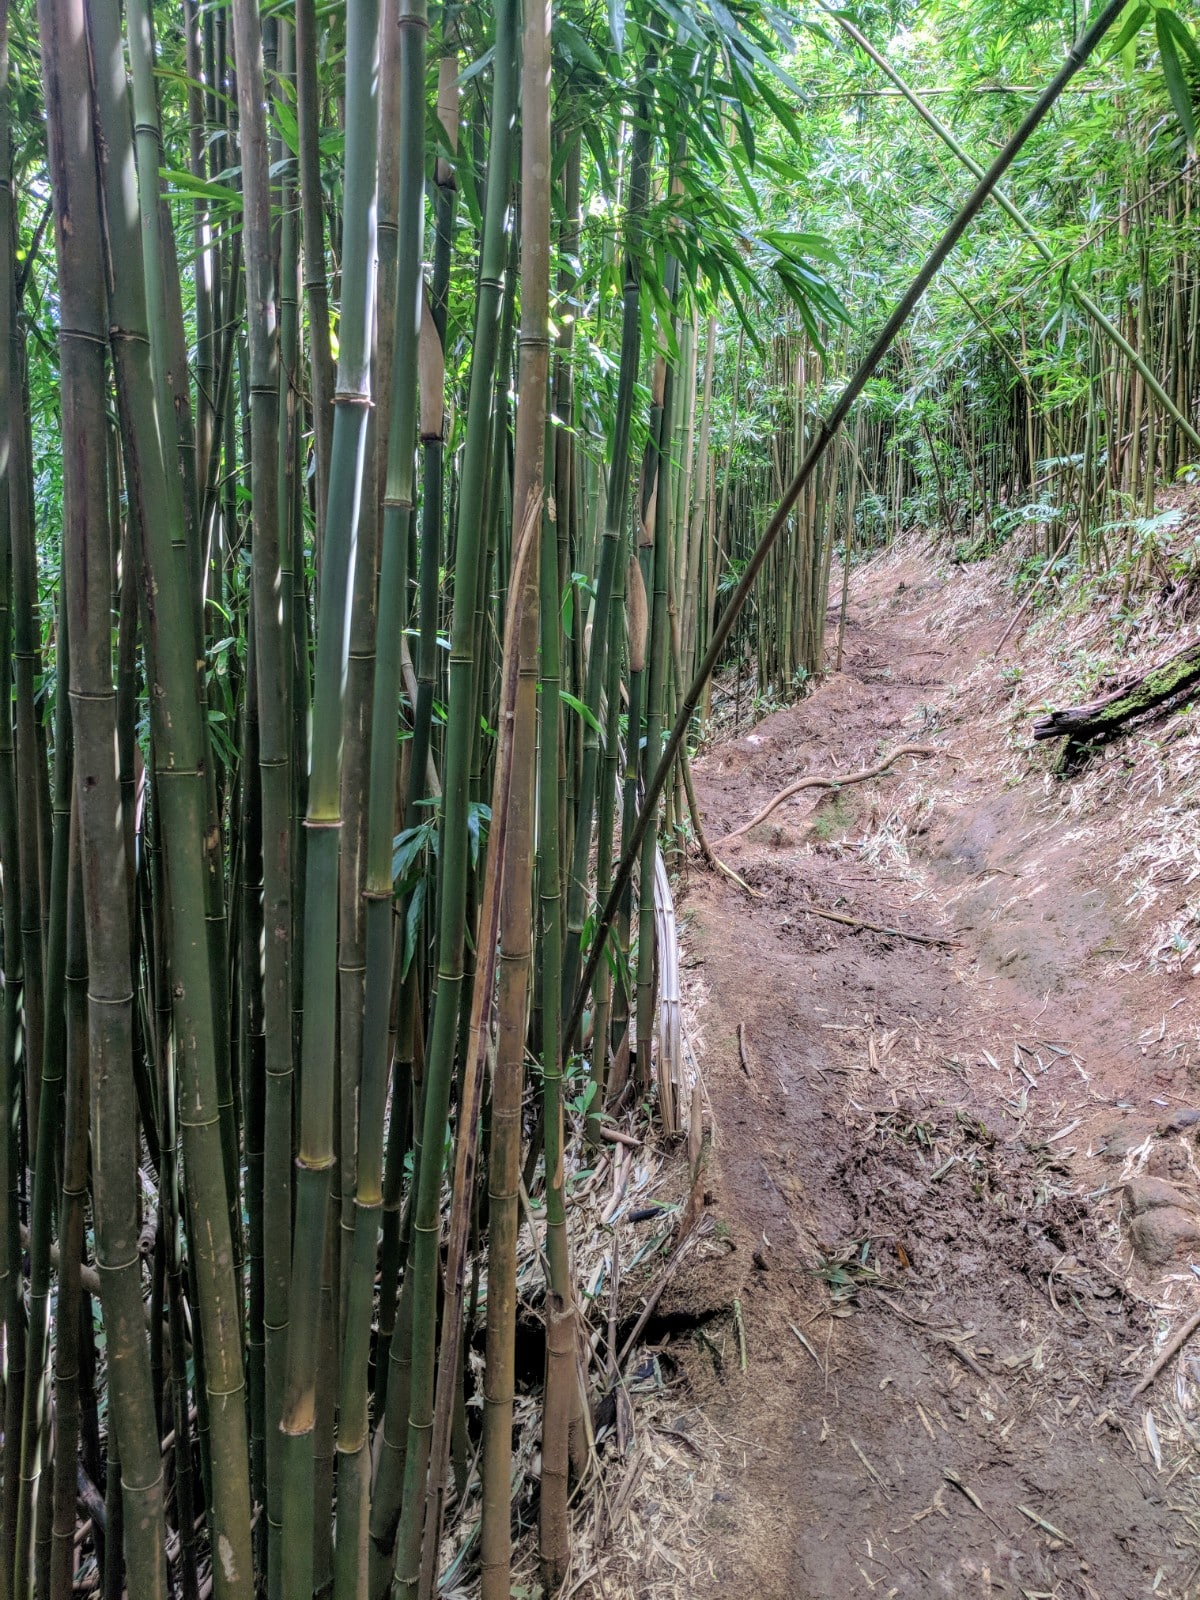 Bamboo trees on the Manoa Falls Hike is truly a unique sight.